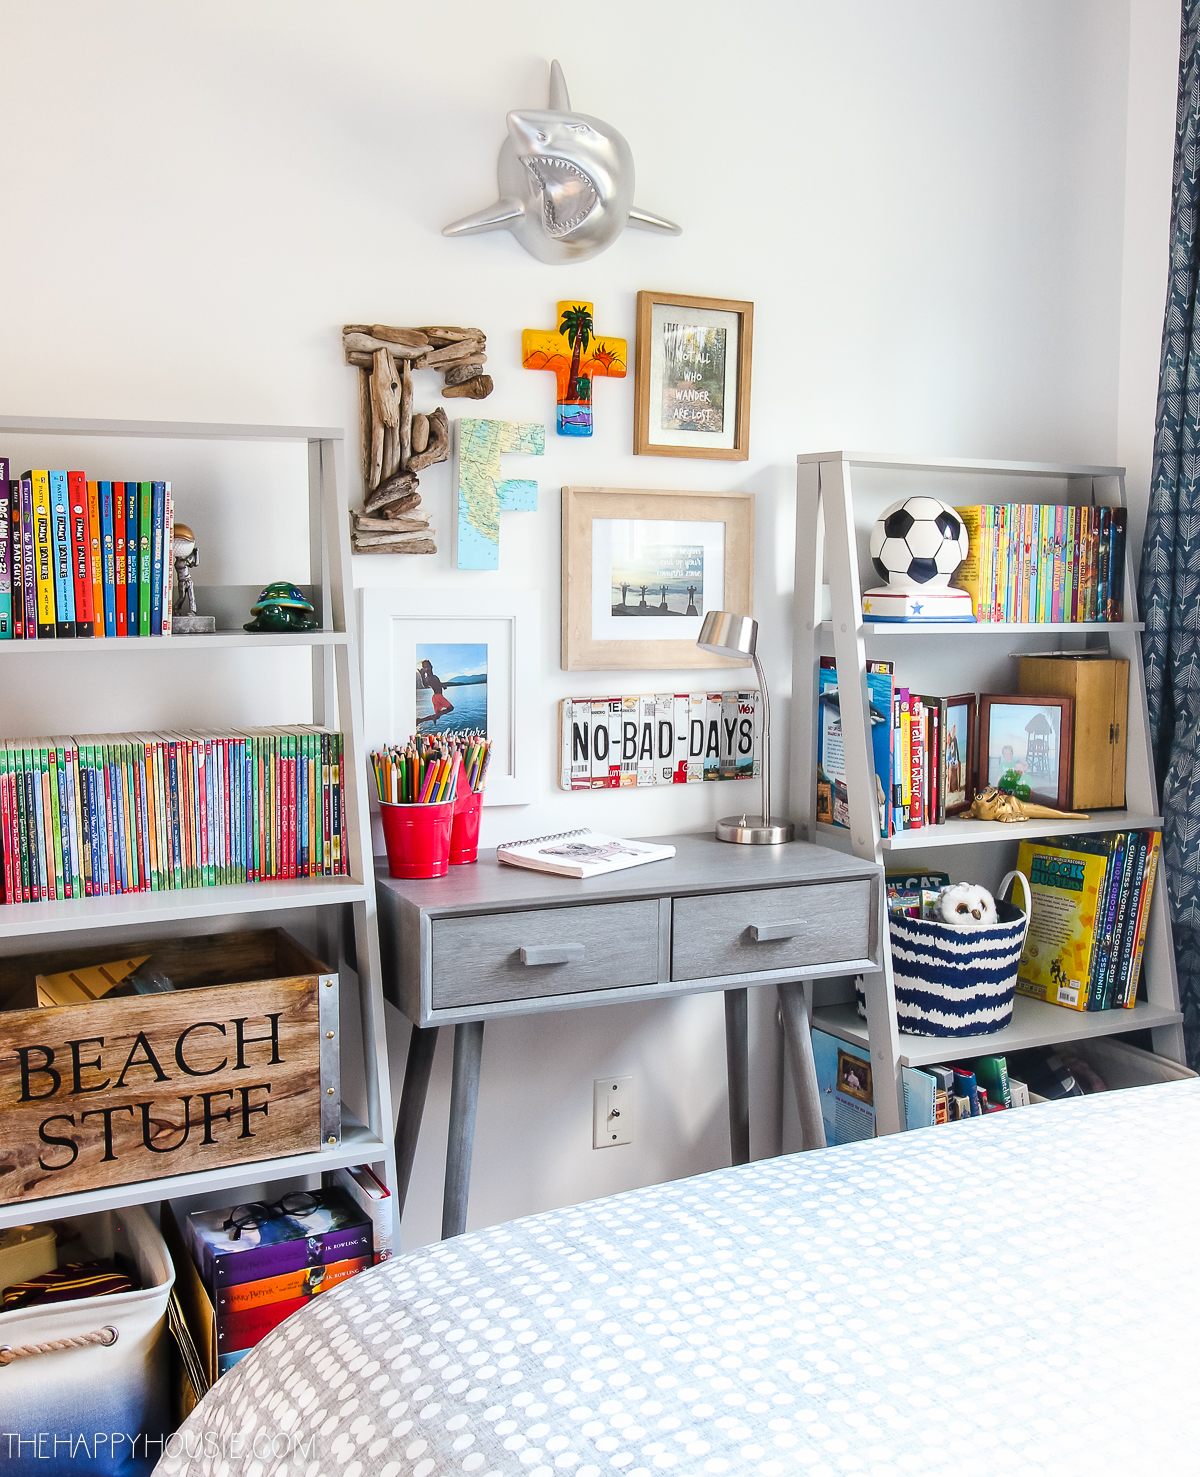 A small desk is in between two bookshelves in the bedroom.